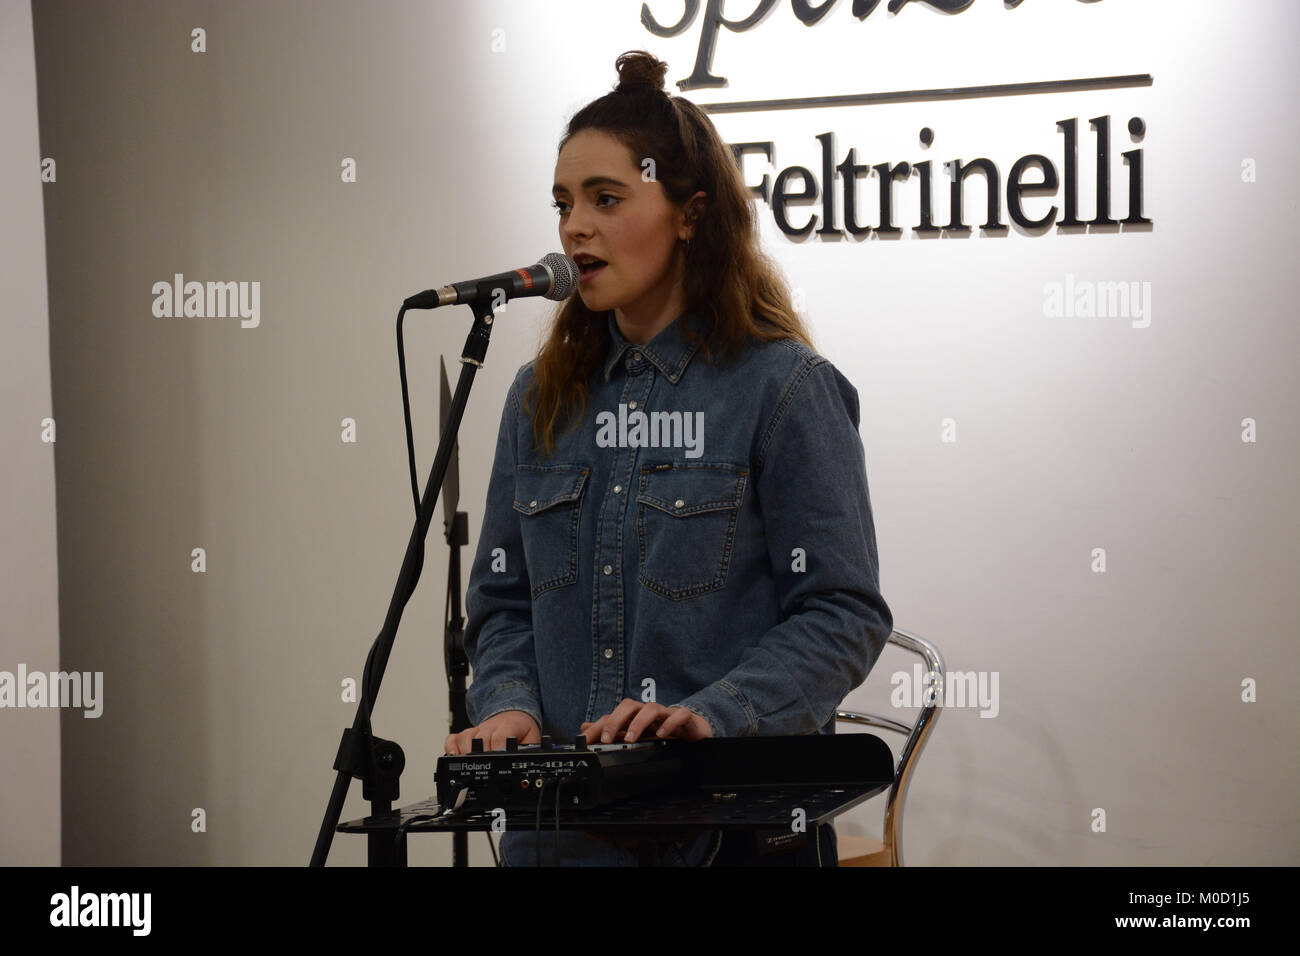 Naples, Italy. 20th Jan, 2018. Italian singer Francesca Michielin performed at Feltrinelli Library in a mini live and then signed autographs of her's new album "2640". Credit: Mariano Montella/Alamy Live News Stock Photo